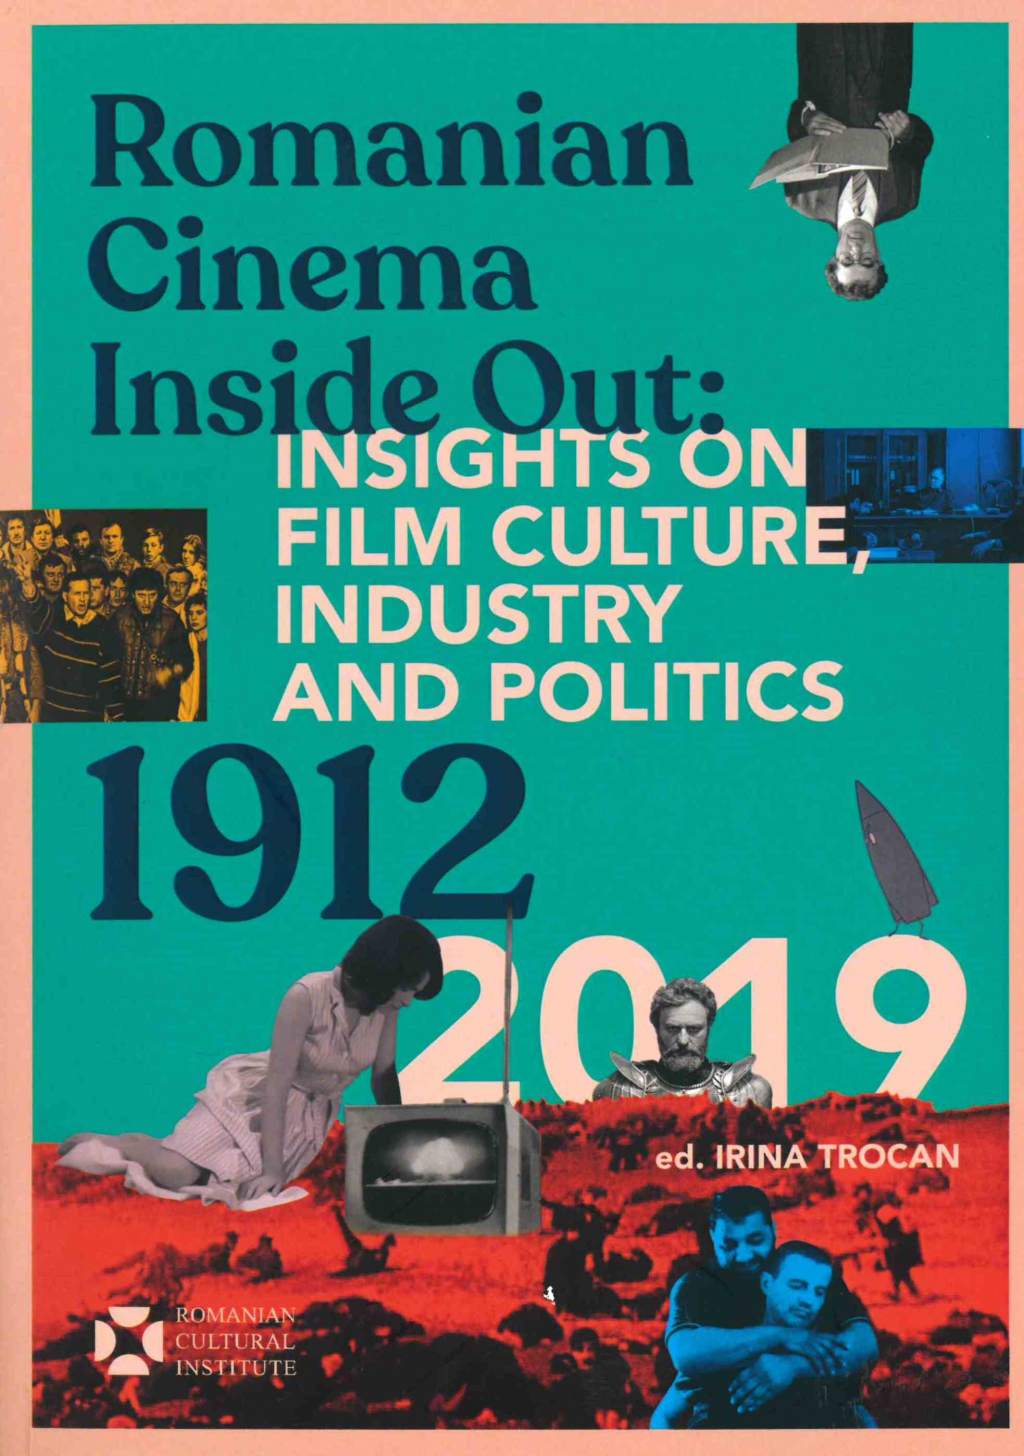 Romanian Cinema Inside Out: Insights on film culture, industry and politics (1912-2019) | Irina Trocan